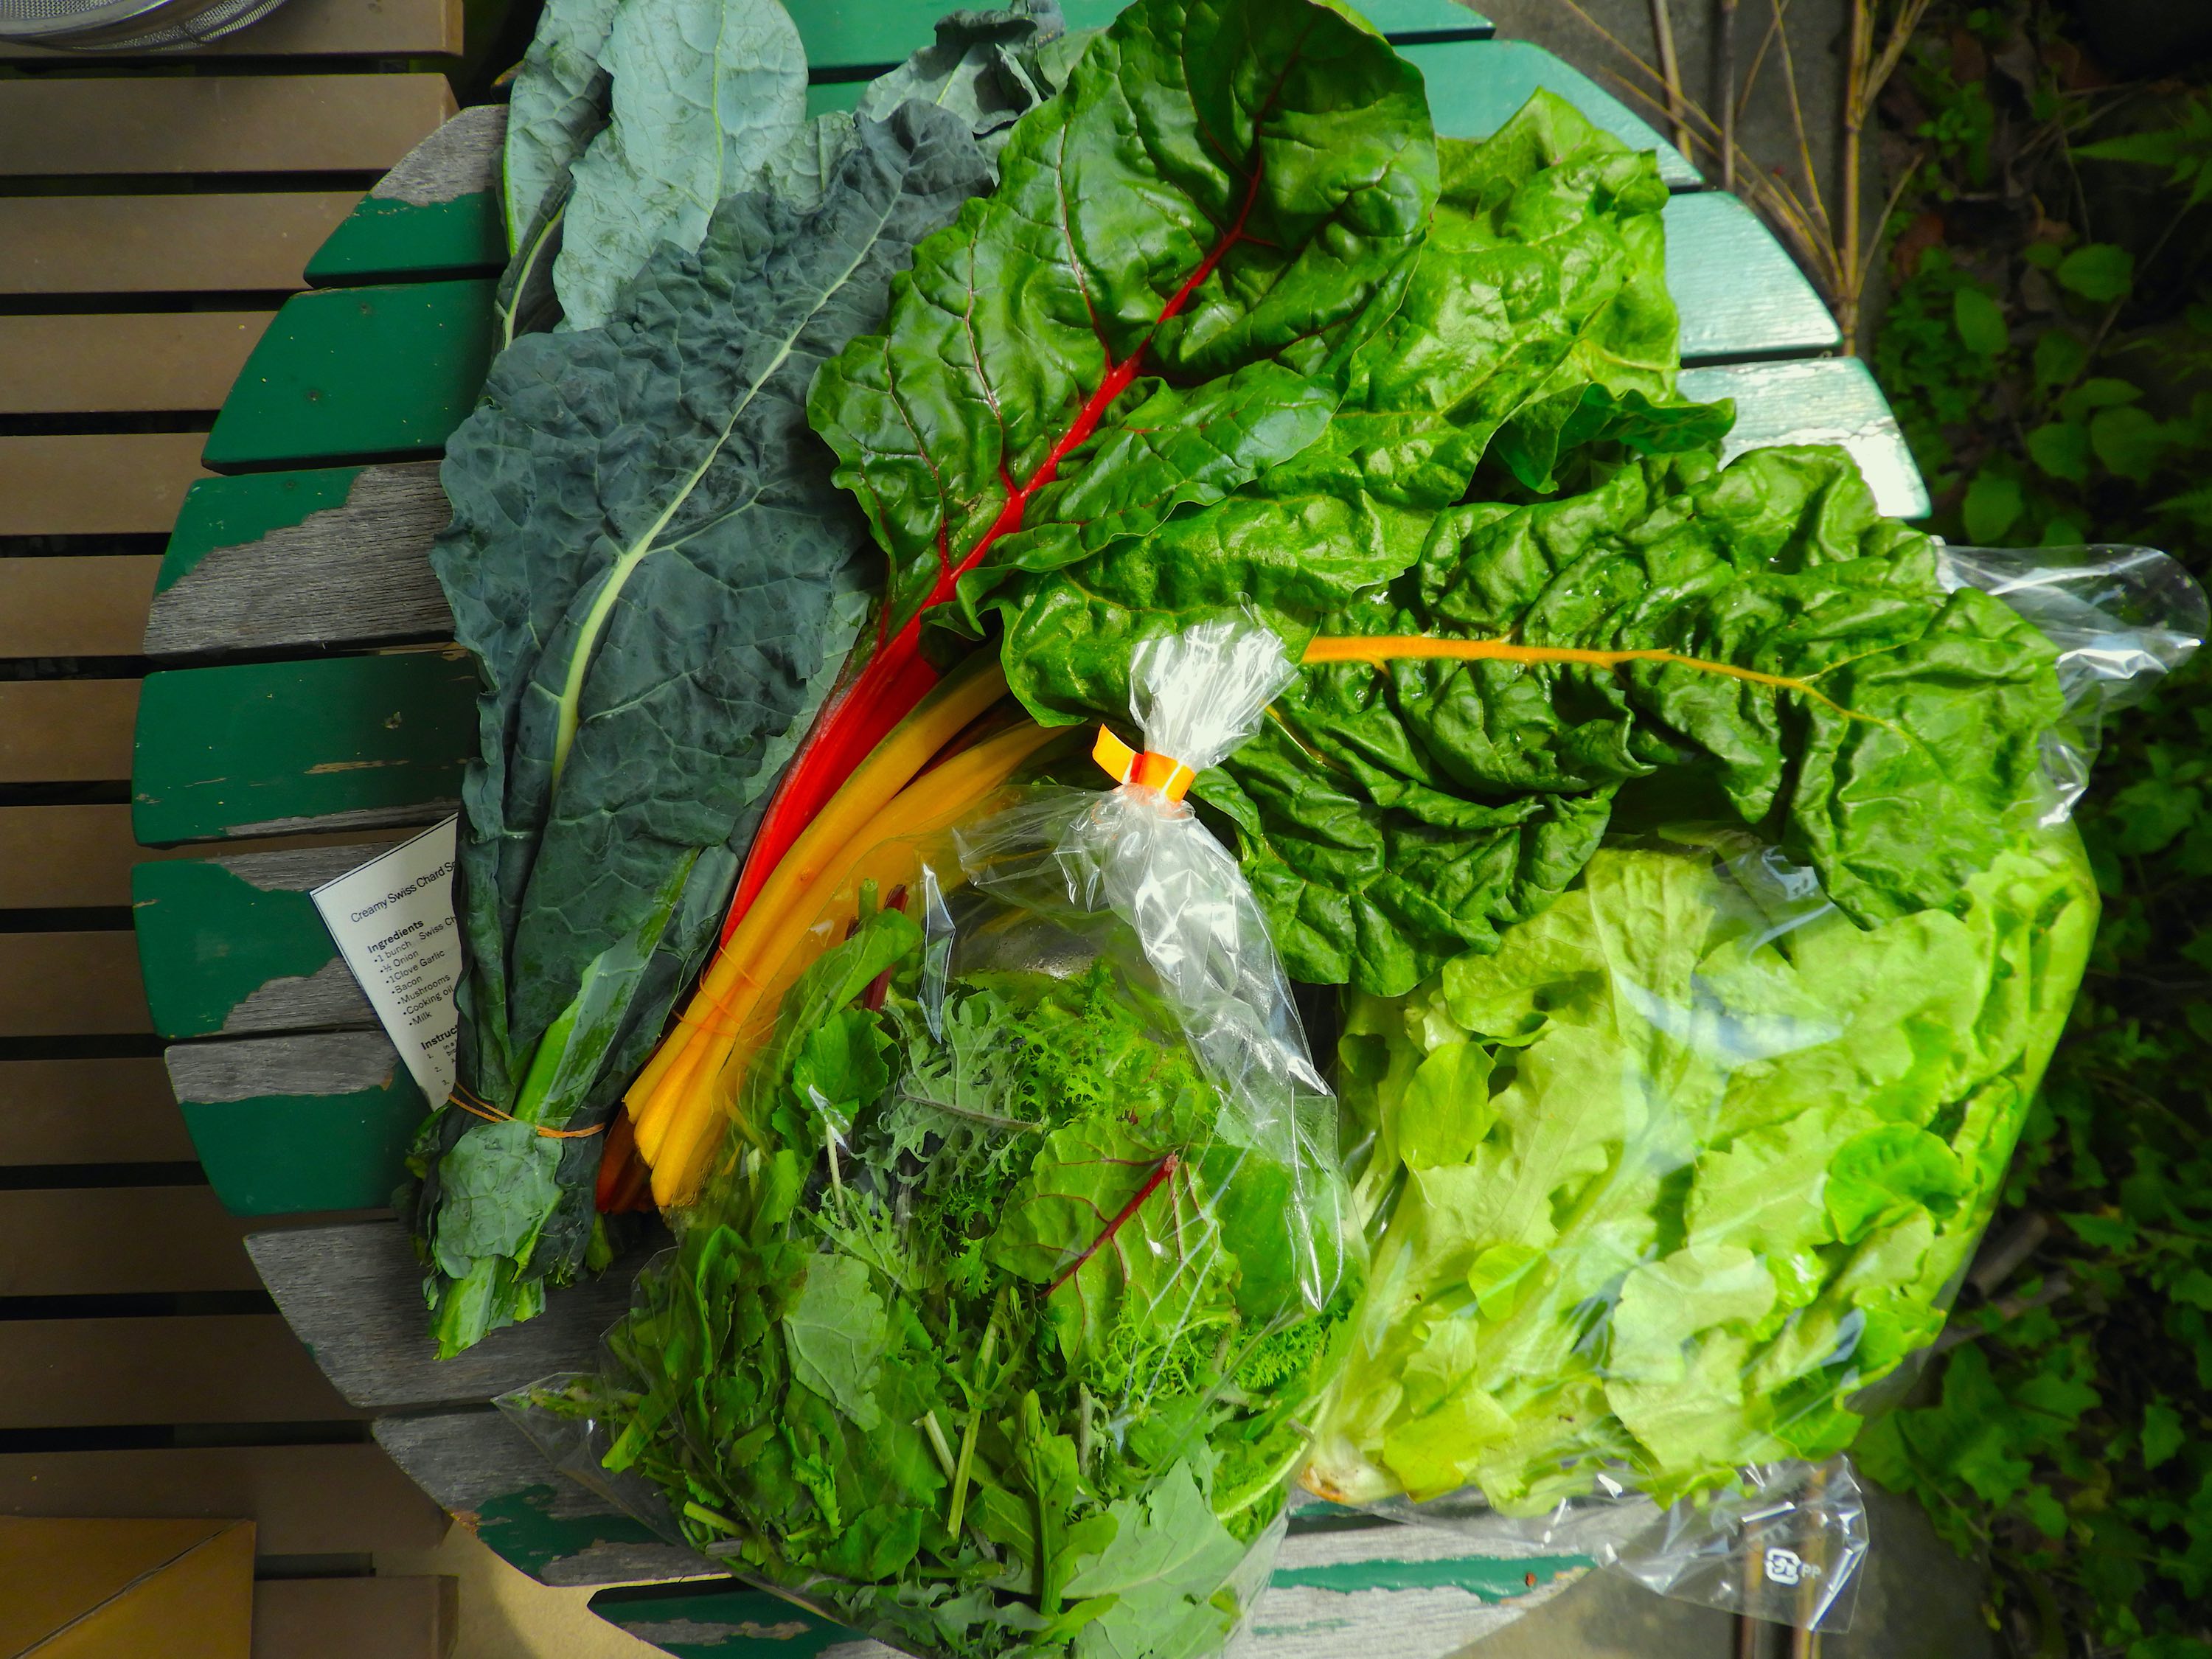 Get Your Veg Fix In Tokyo With These Vegetable Delivery Boxes